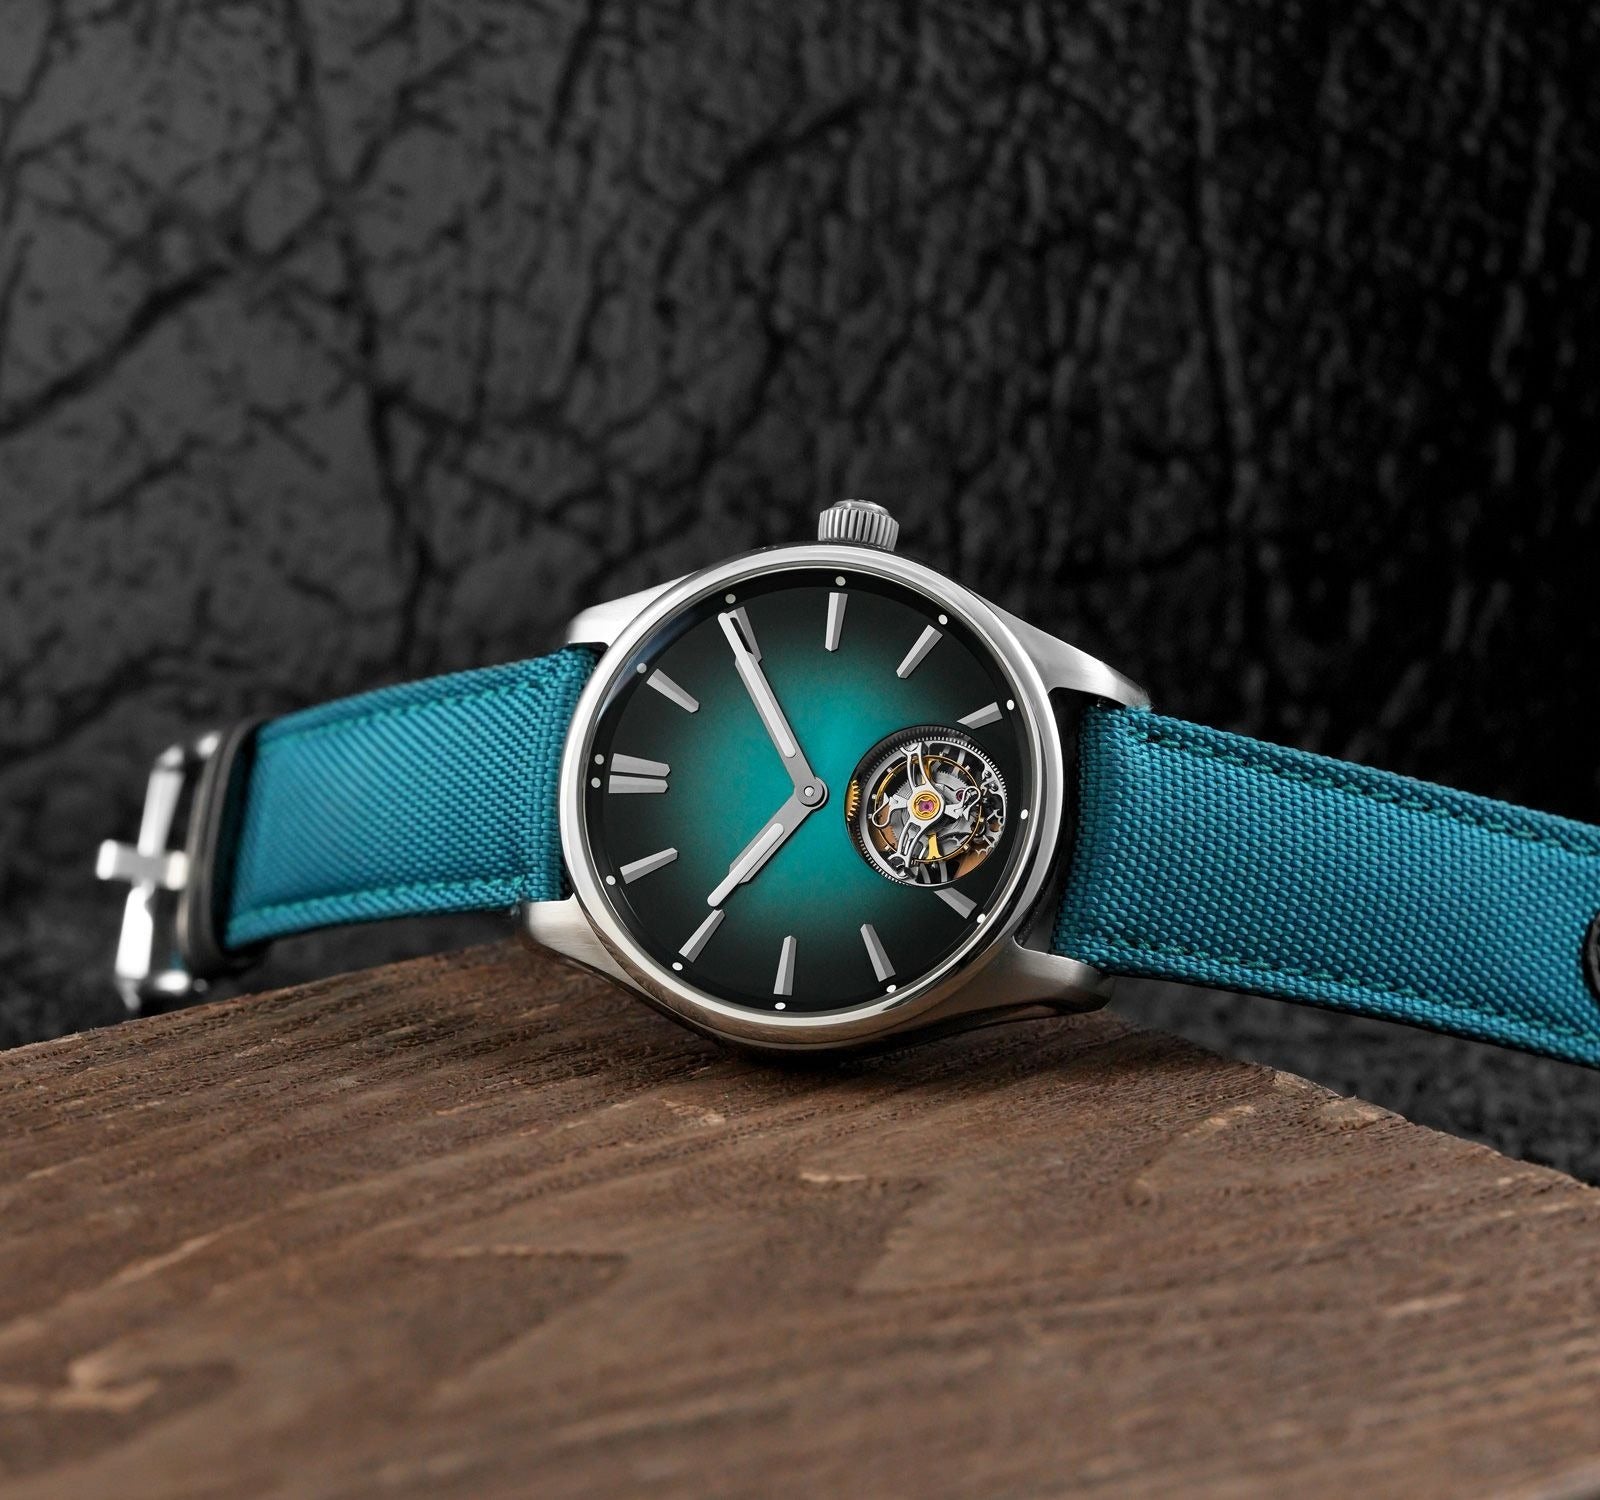 ANNOUNCING: You can now buy our favourite H. Moser & Cie models in the Time+